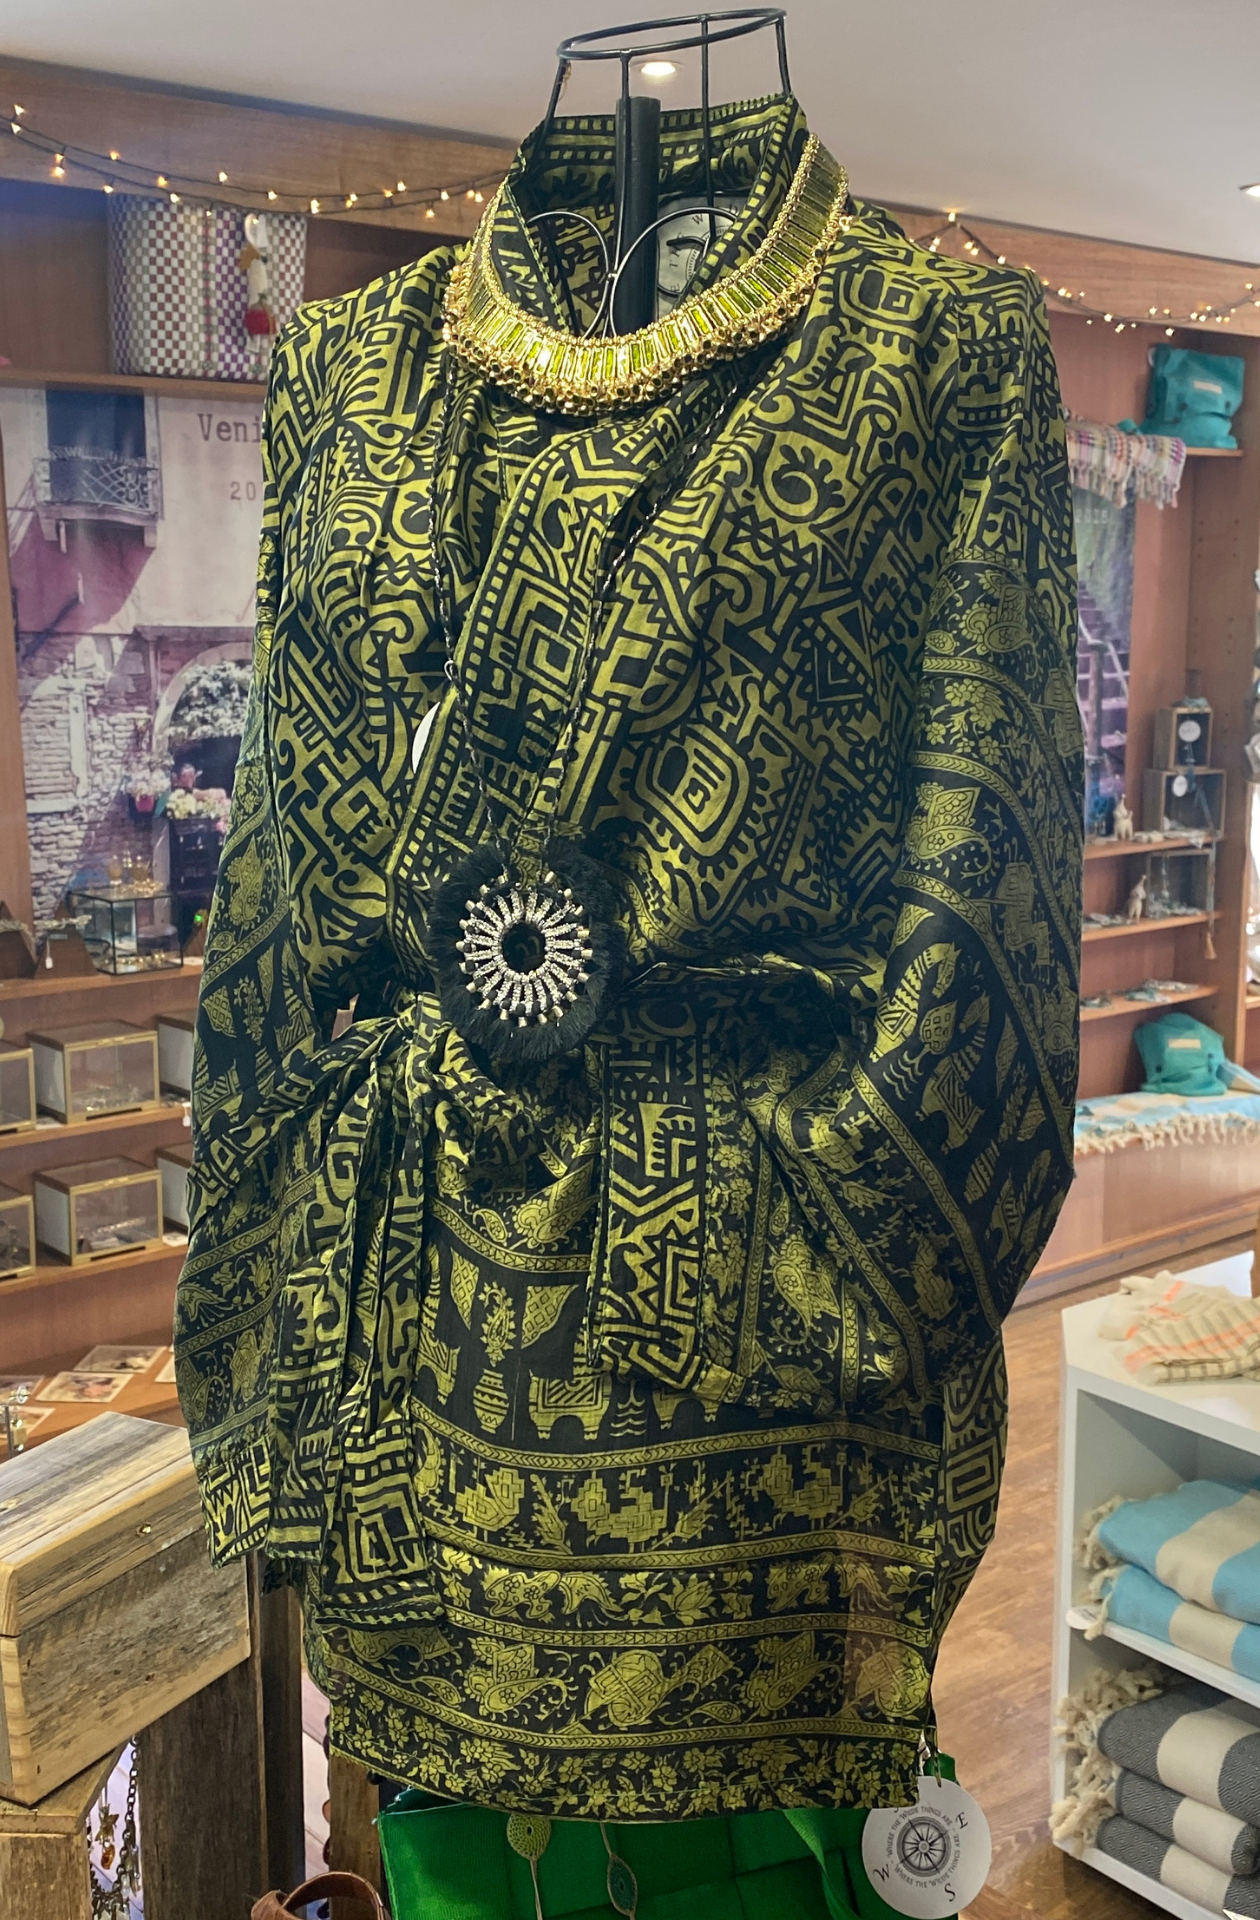 A vintage sari silk kimono jacket displayed on a wire mannican. The jacket is a deep lime green with a black block print of various busy swirls, geometric patterns, creatures and many other things.